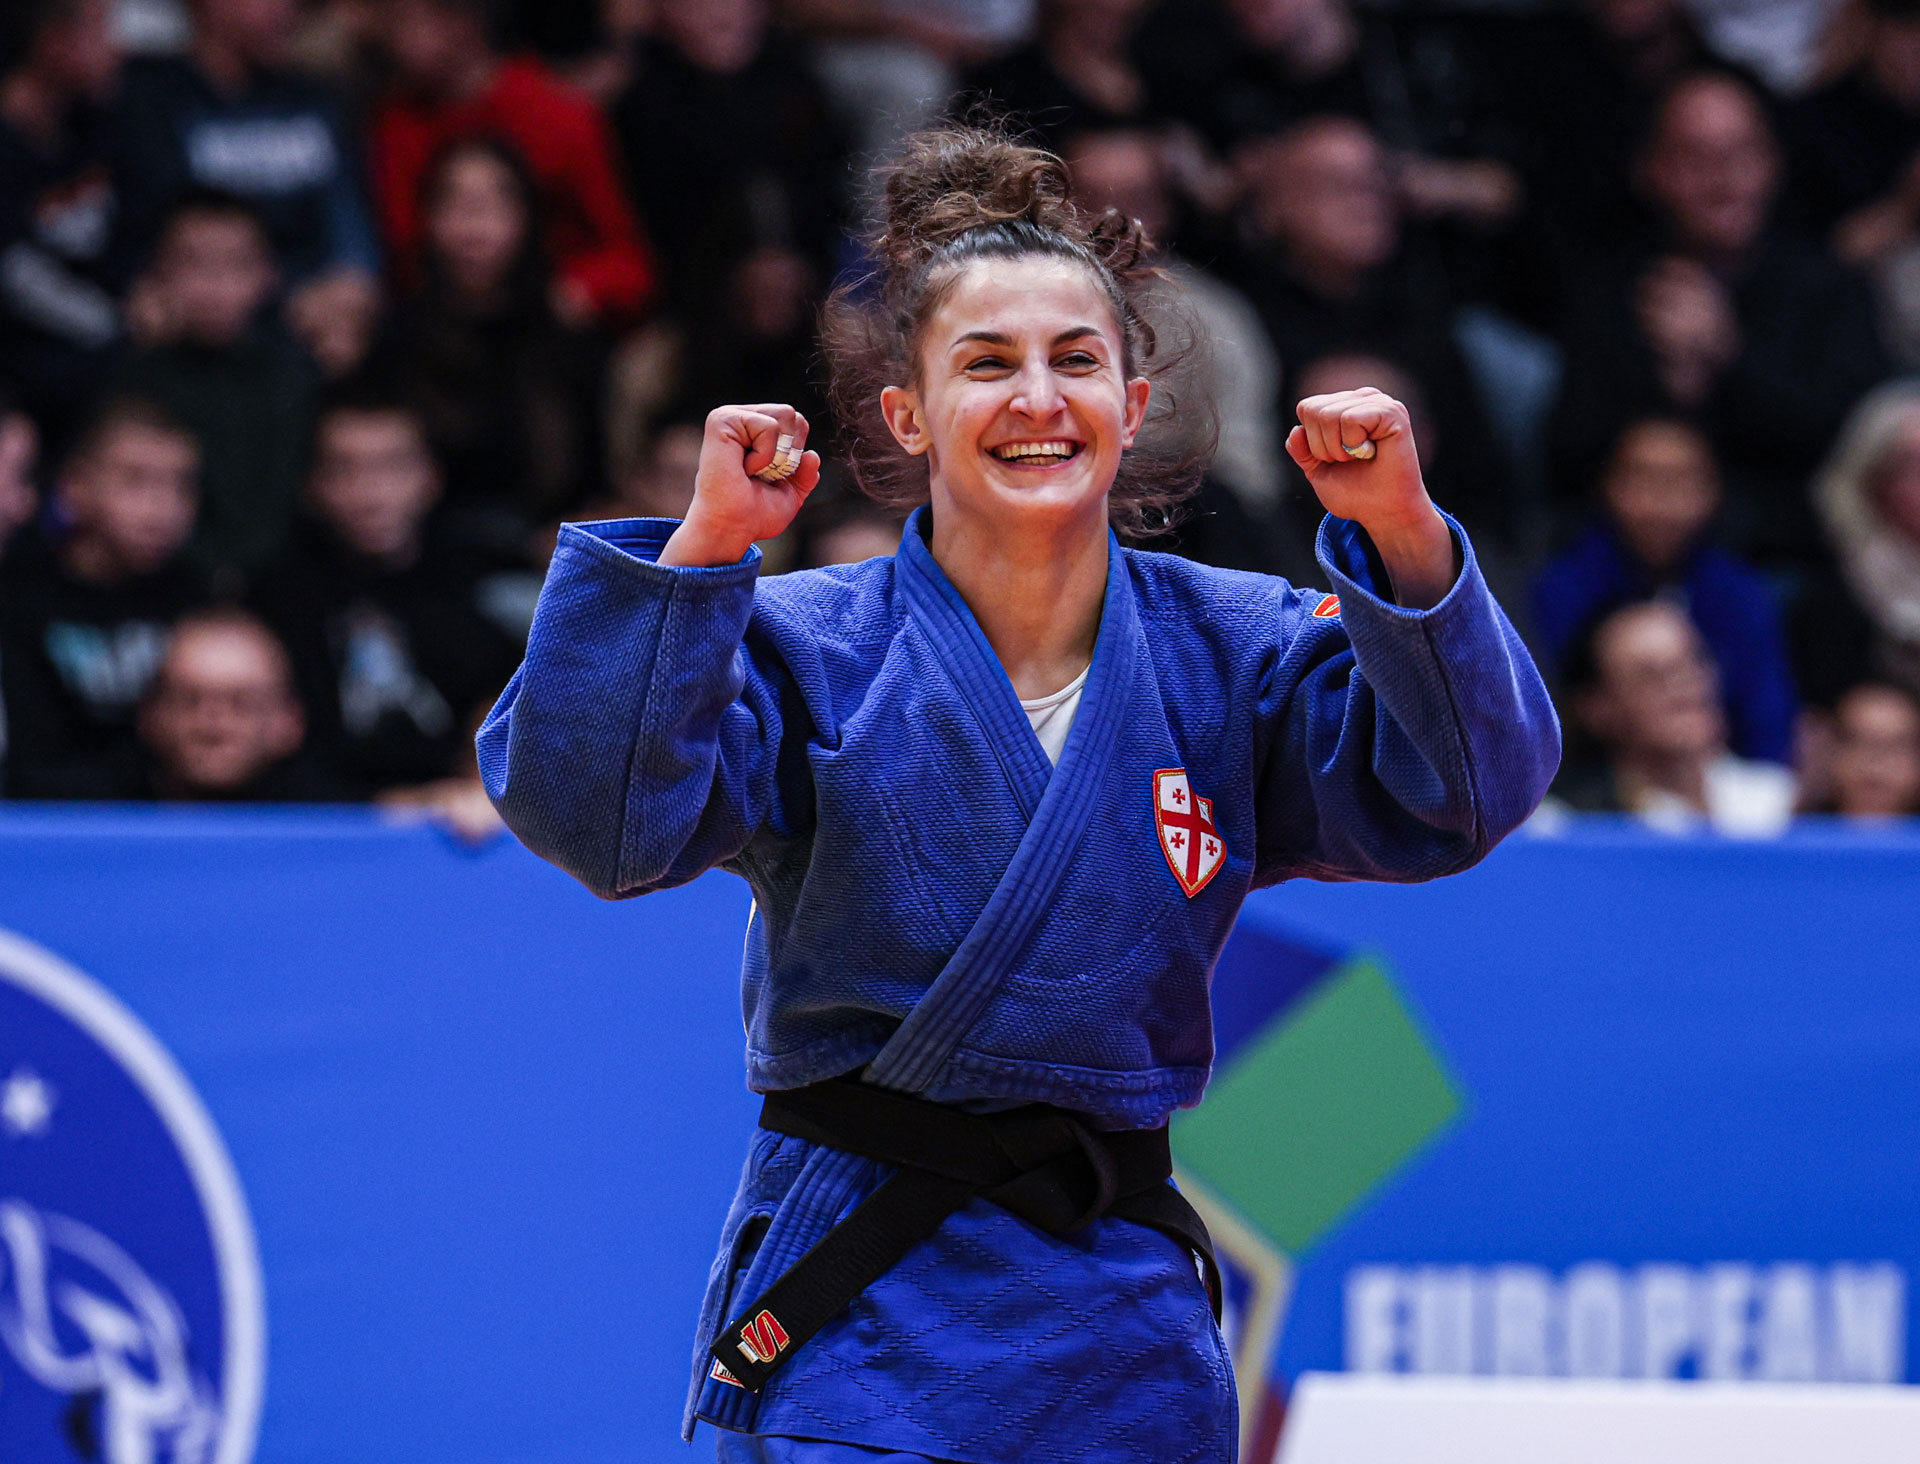 FIRST EUROPEAN CHAMPIONSHIPS TITLE